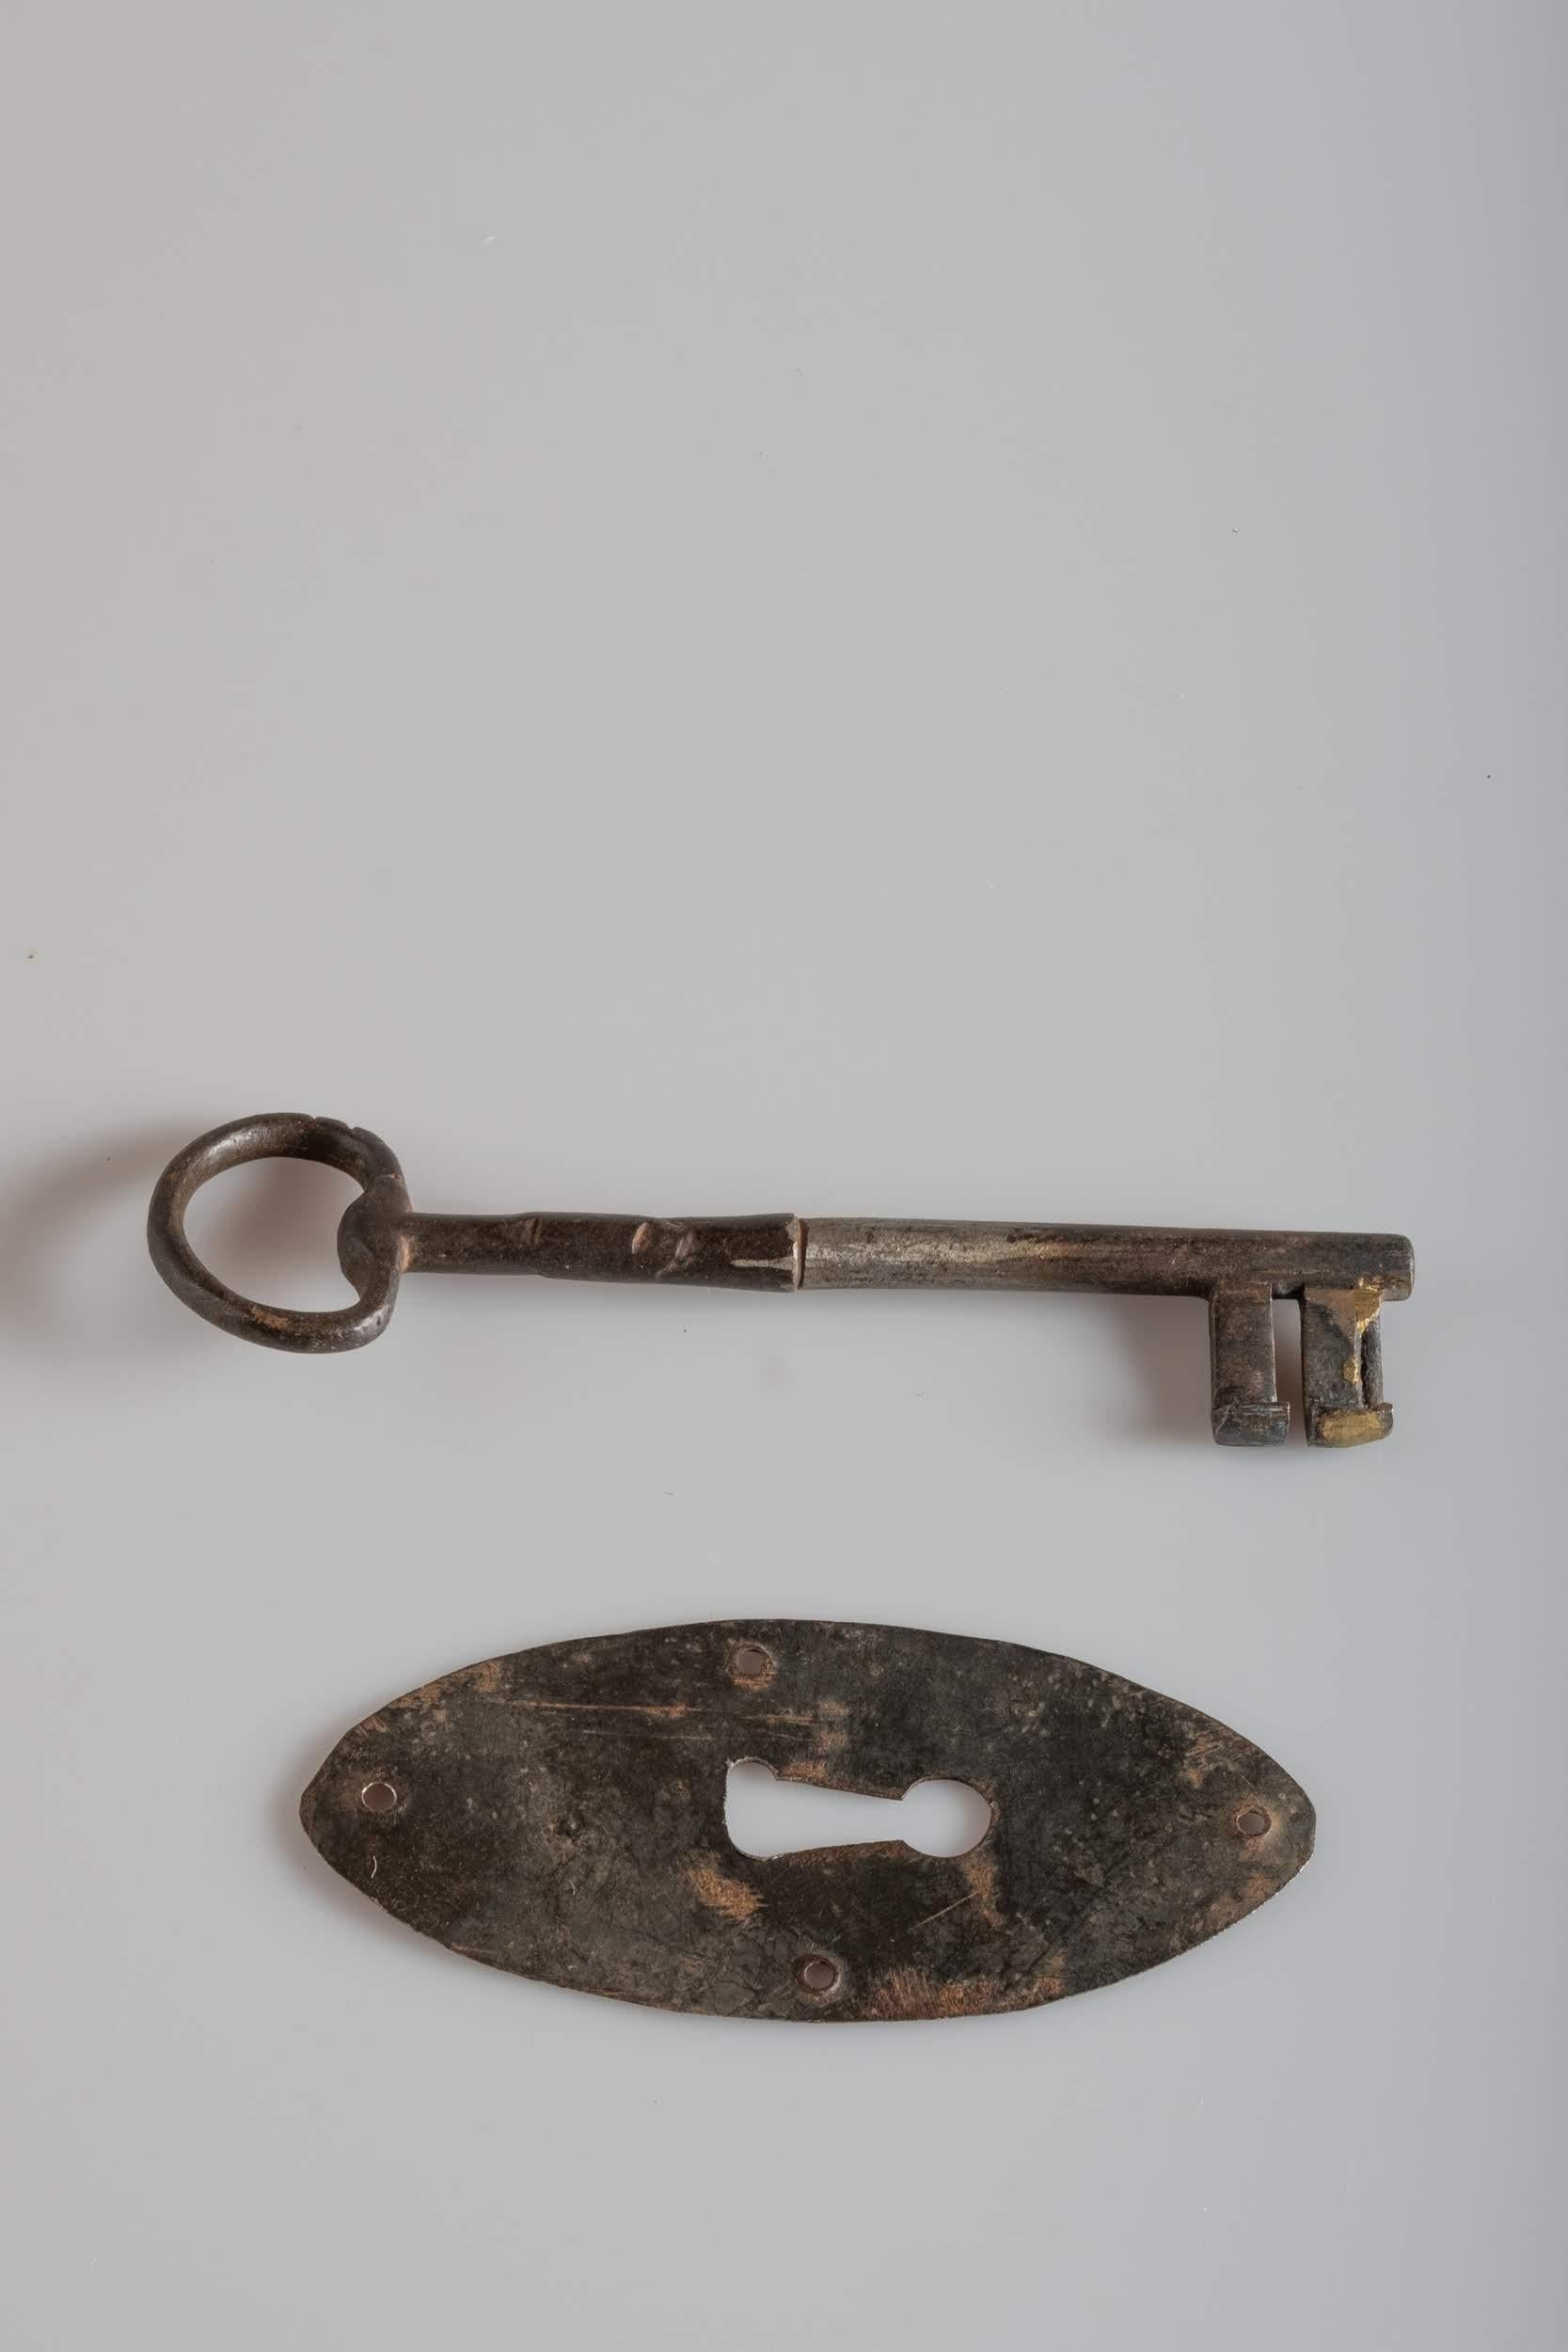 Primitive Box Shaped Handwrought Iron Lock with Its Key and Keyhole, Italy In Good Condition For Sale In New York, NY